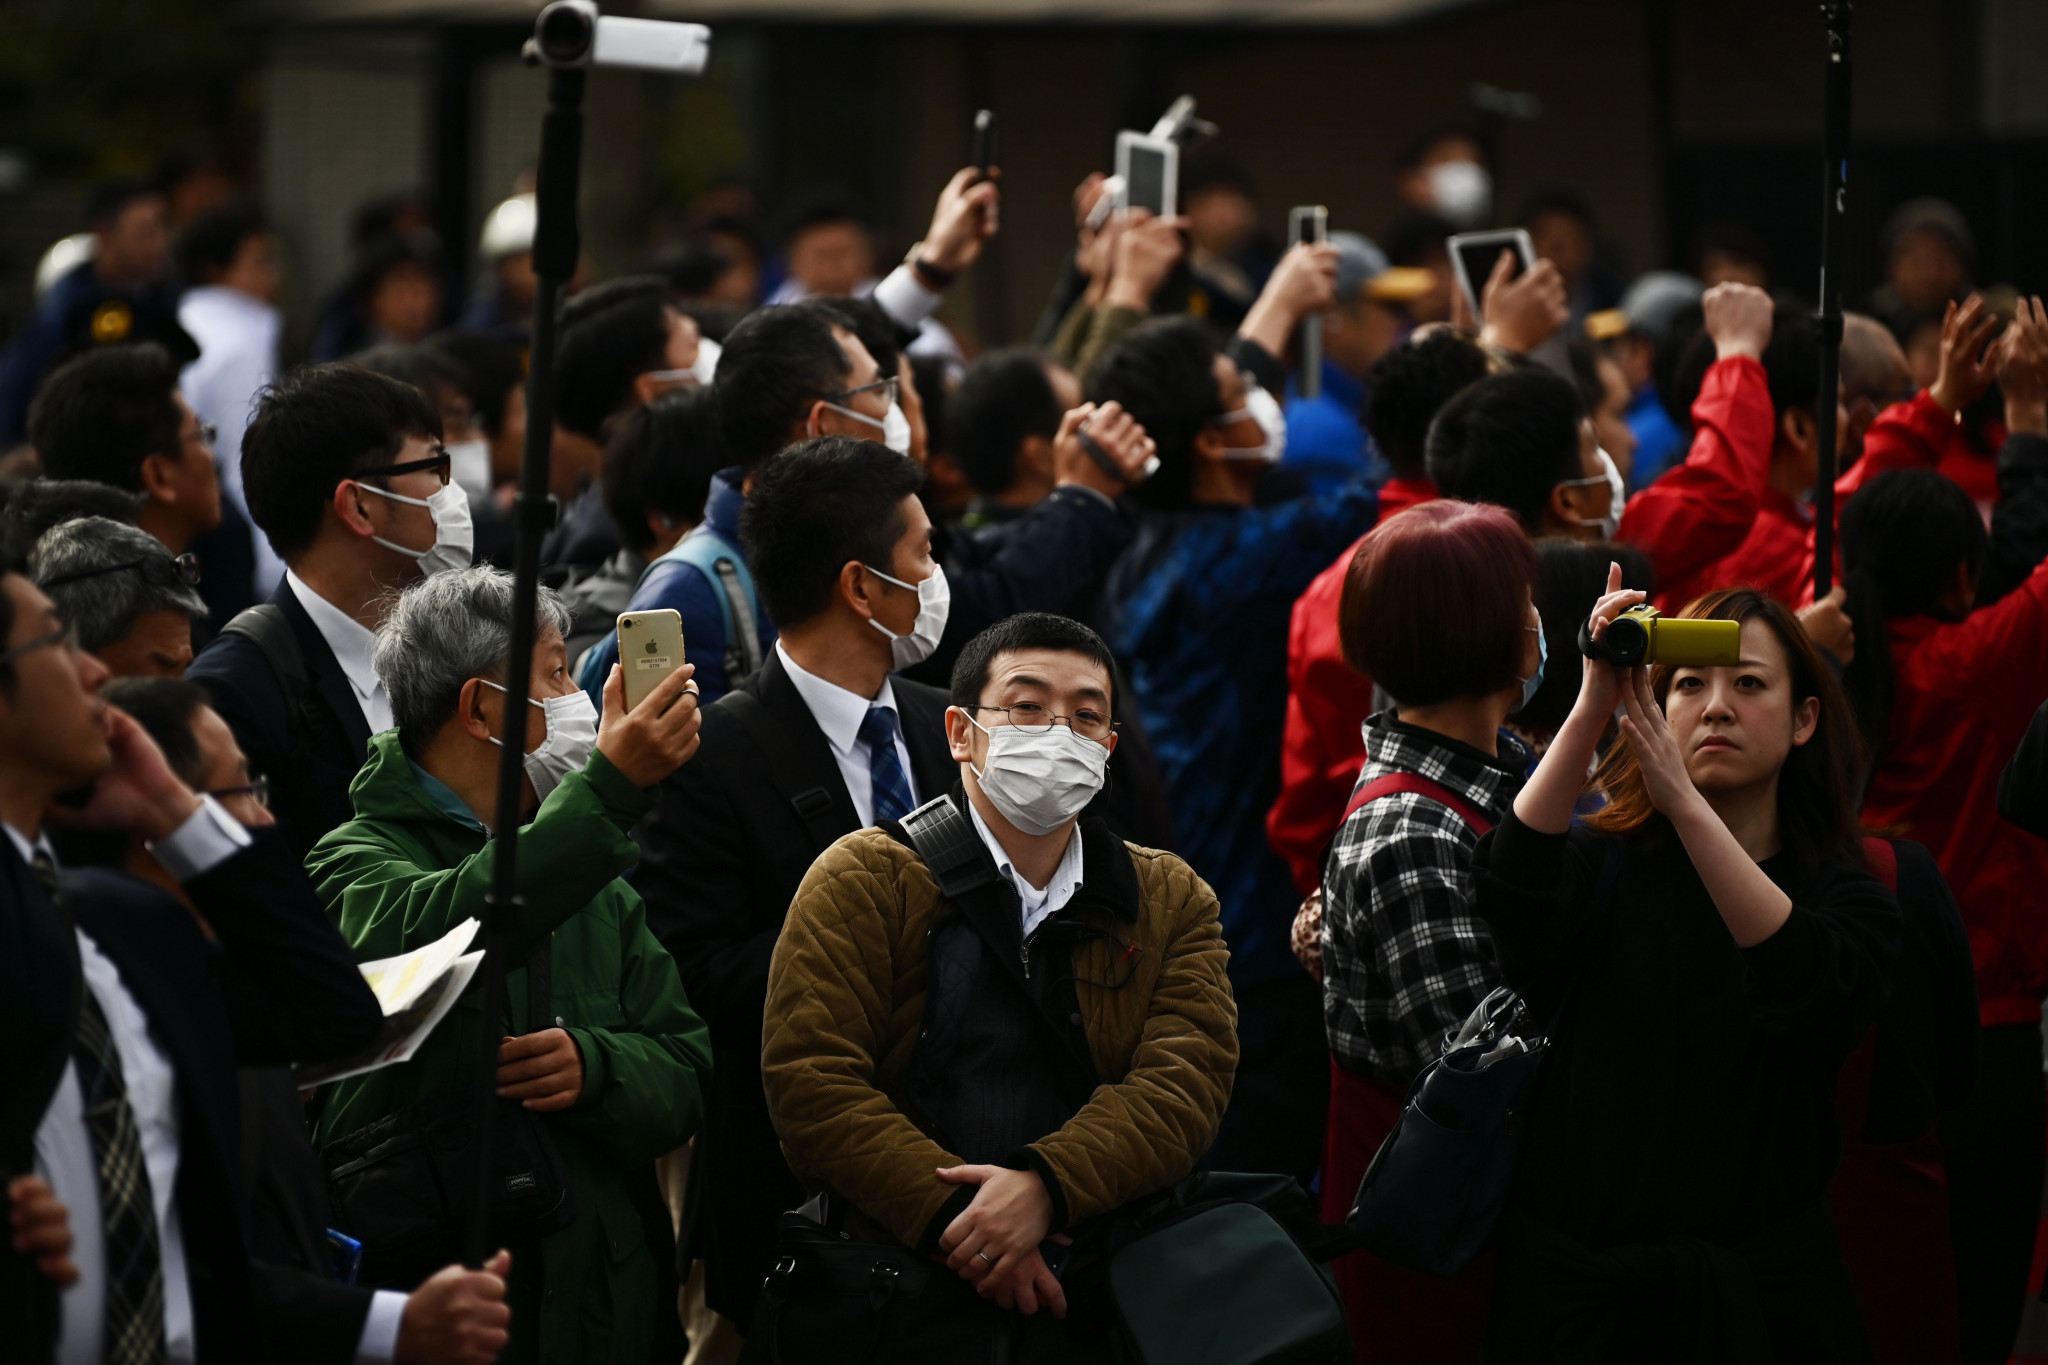 Amid coronavirus fears, many wore masks at the event ©Getty Images